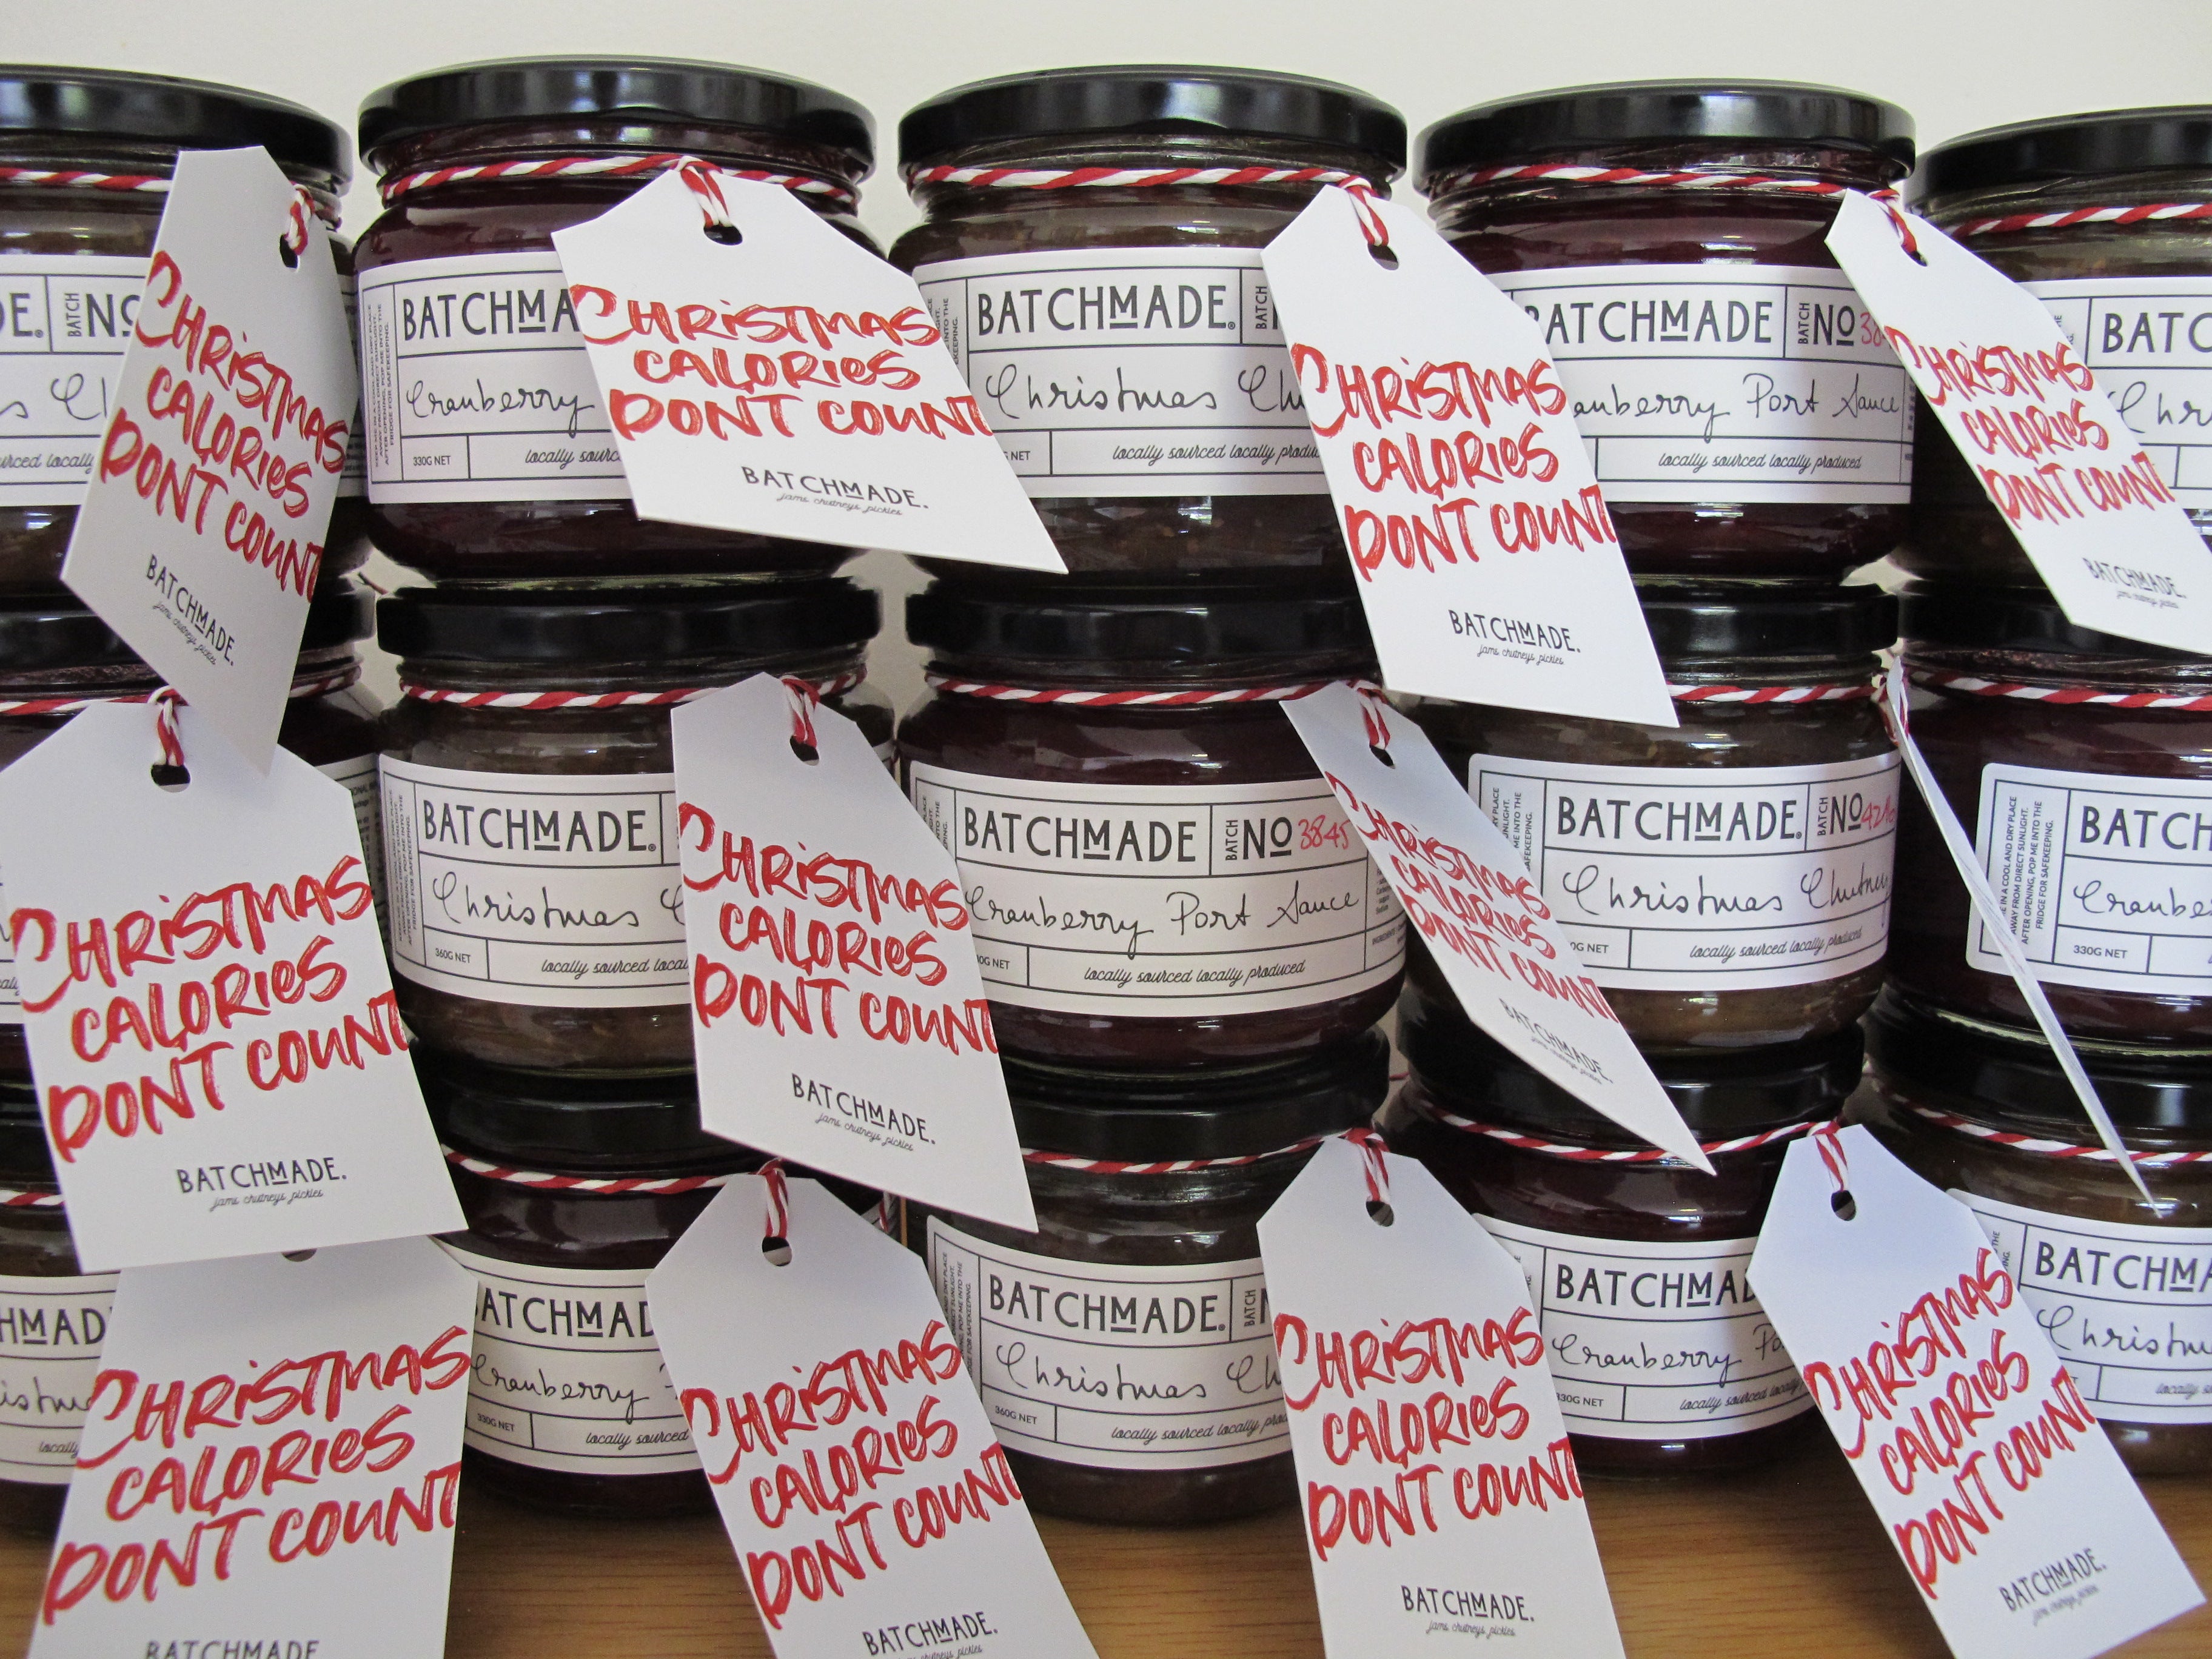 Wall of jars of BatchMade Christmas preserves each with  Christmas tag " Christmas calories don't count"